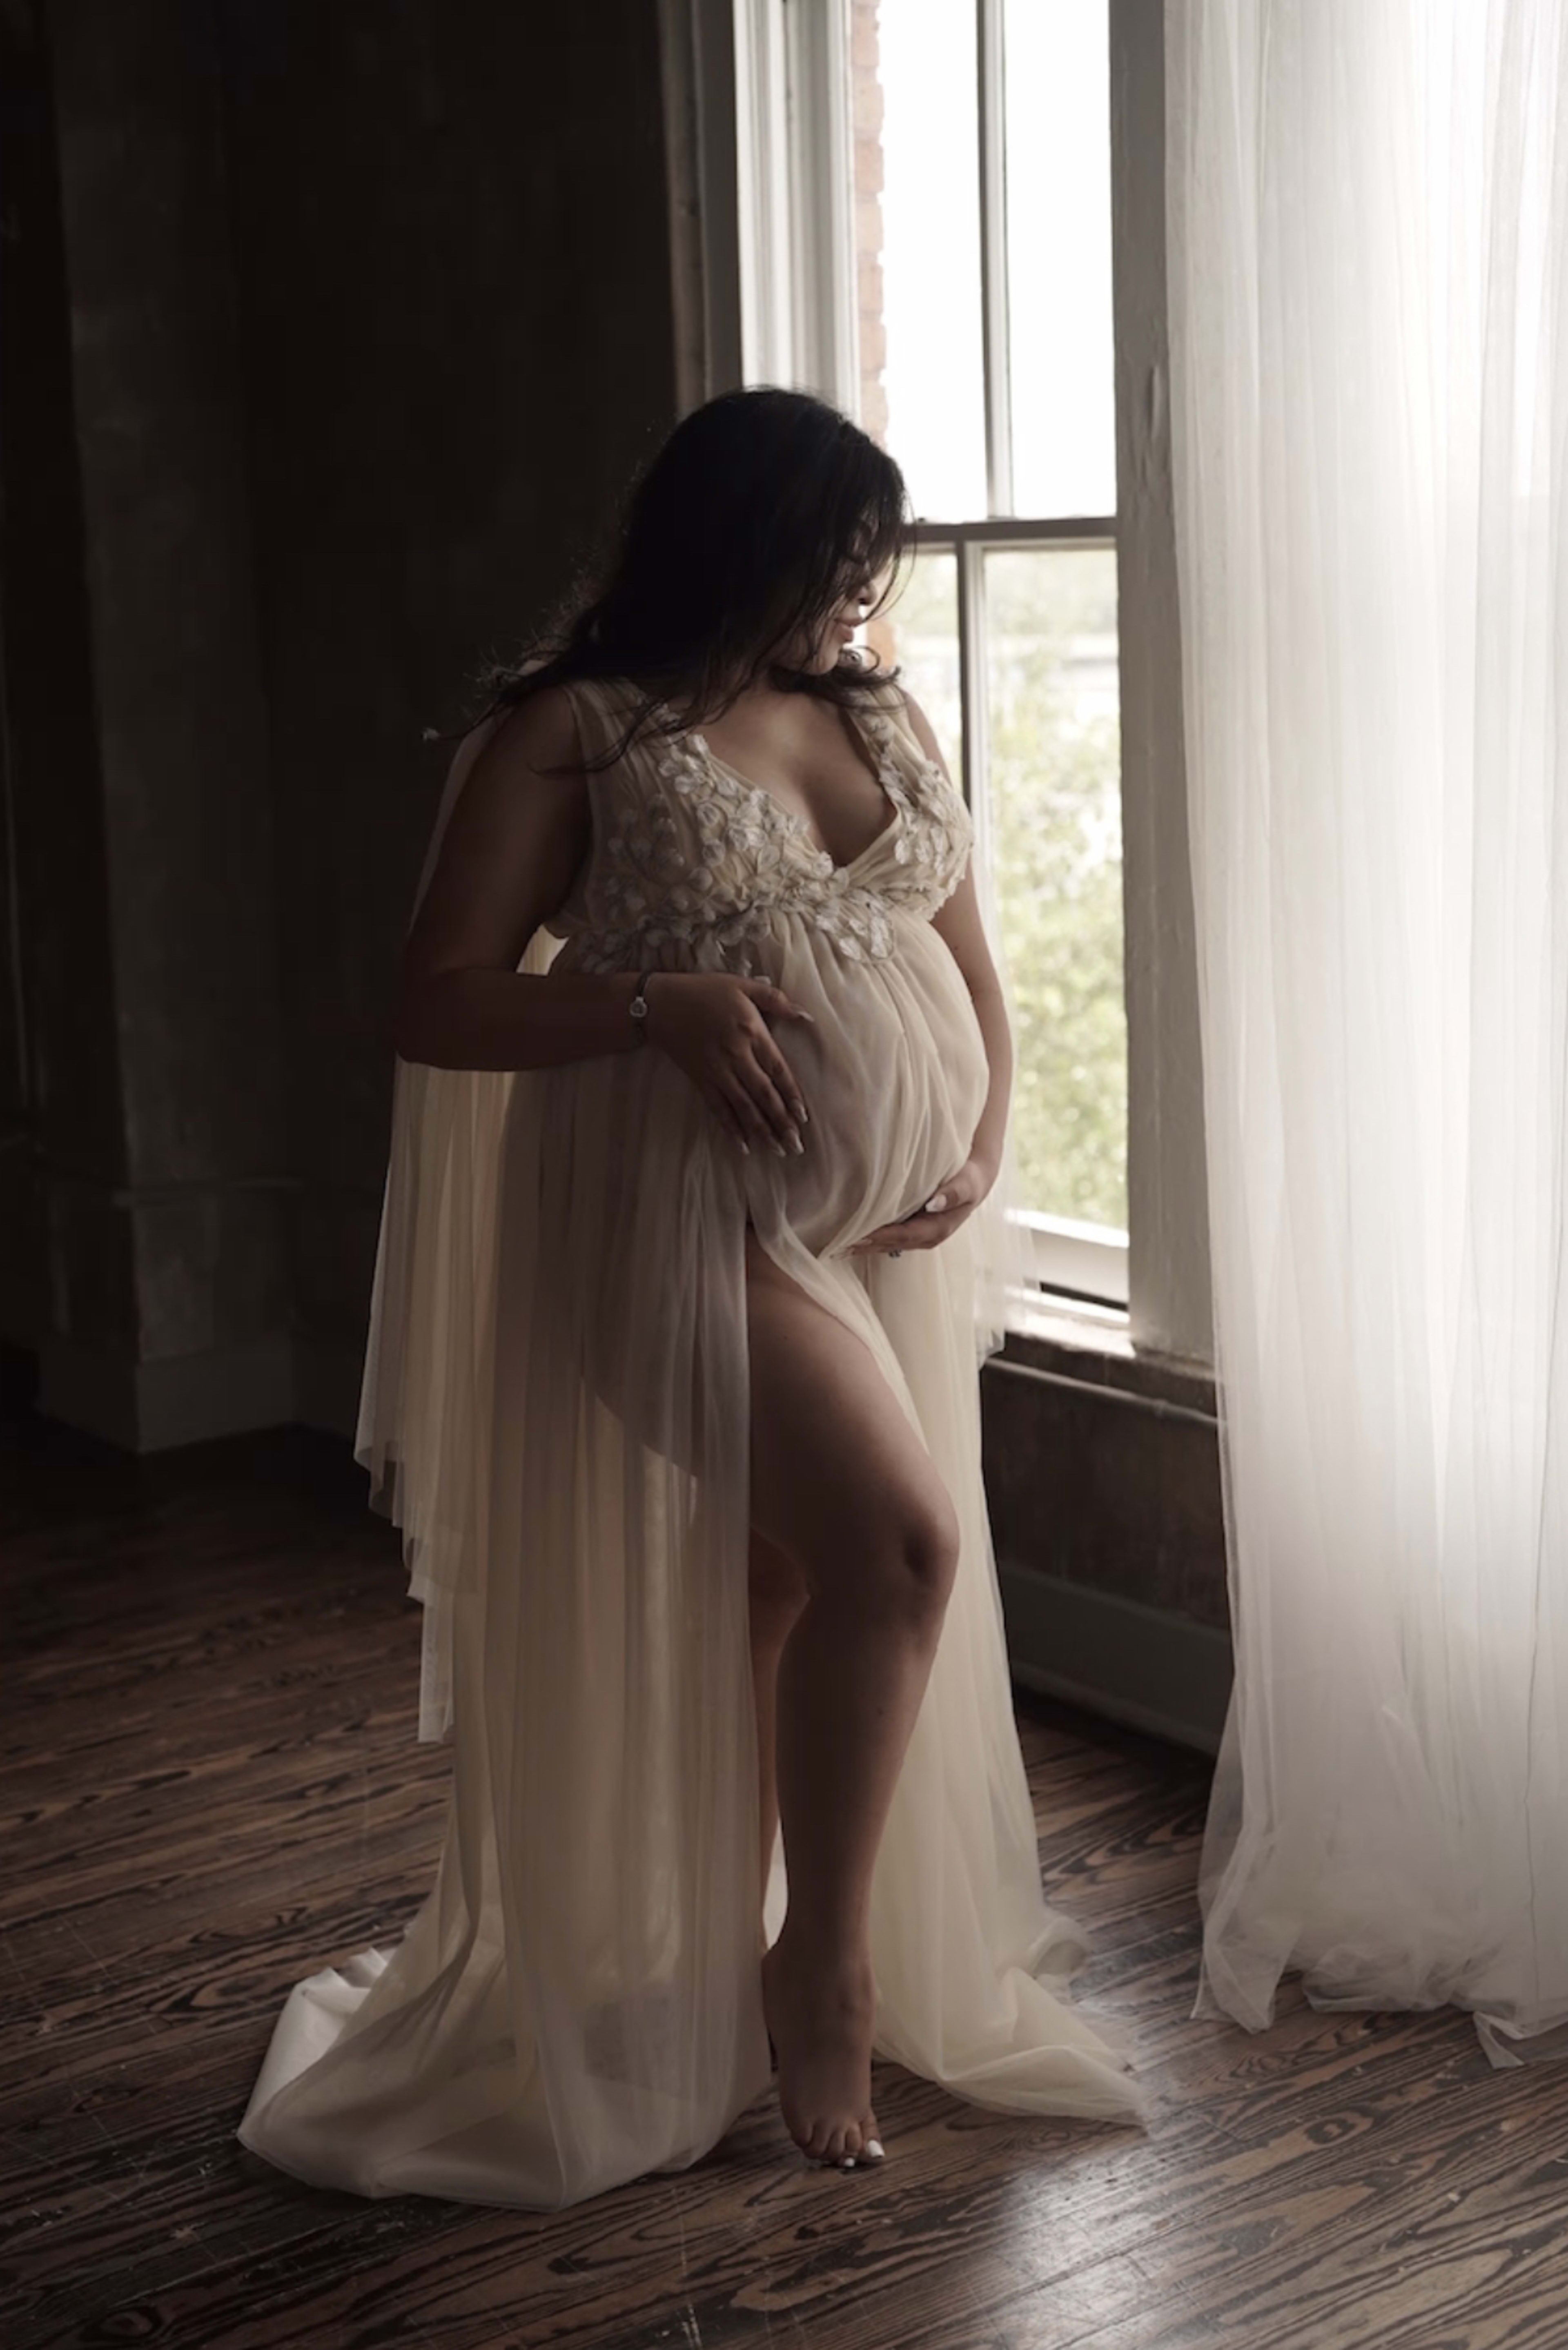 A maternity photoshoot of a woman in a white dress standing in front of a window.